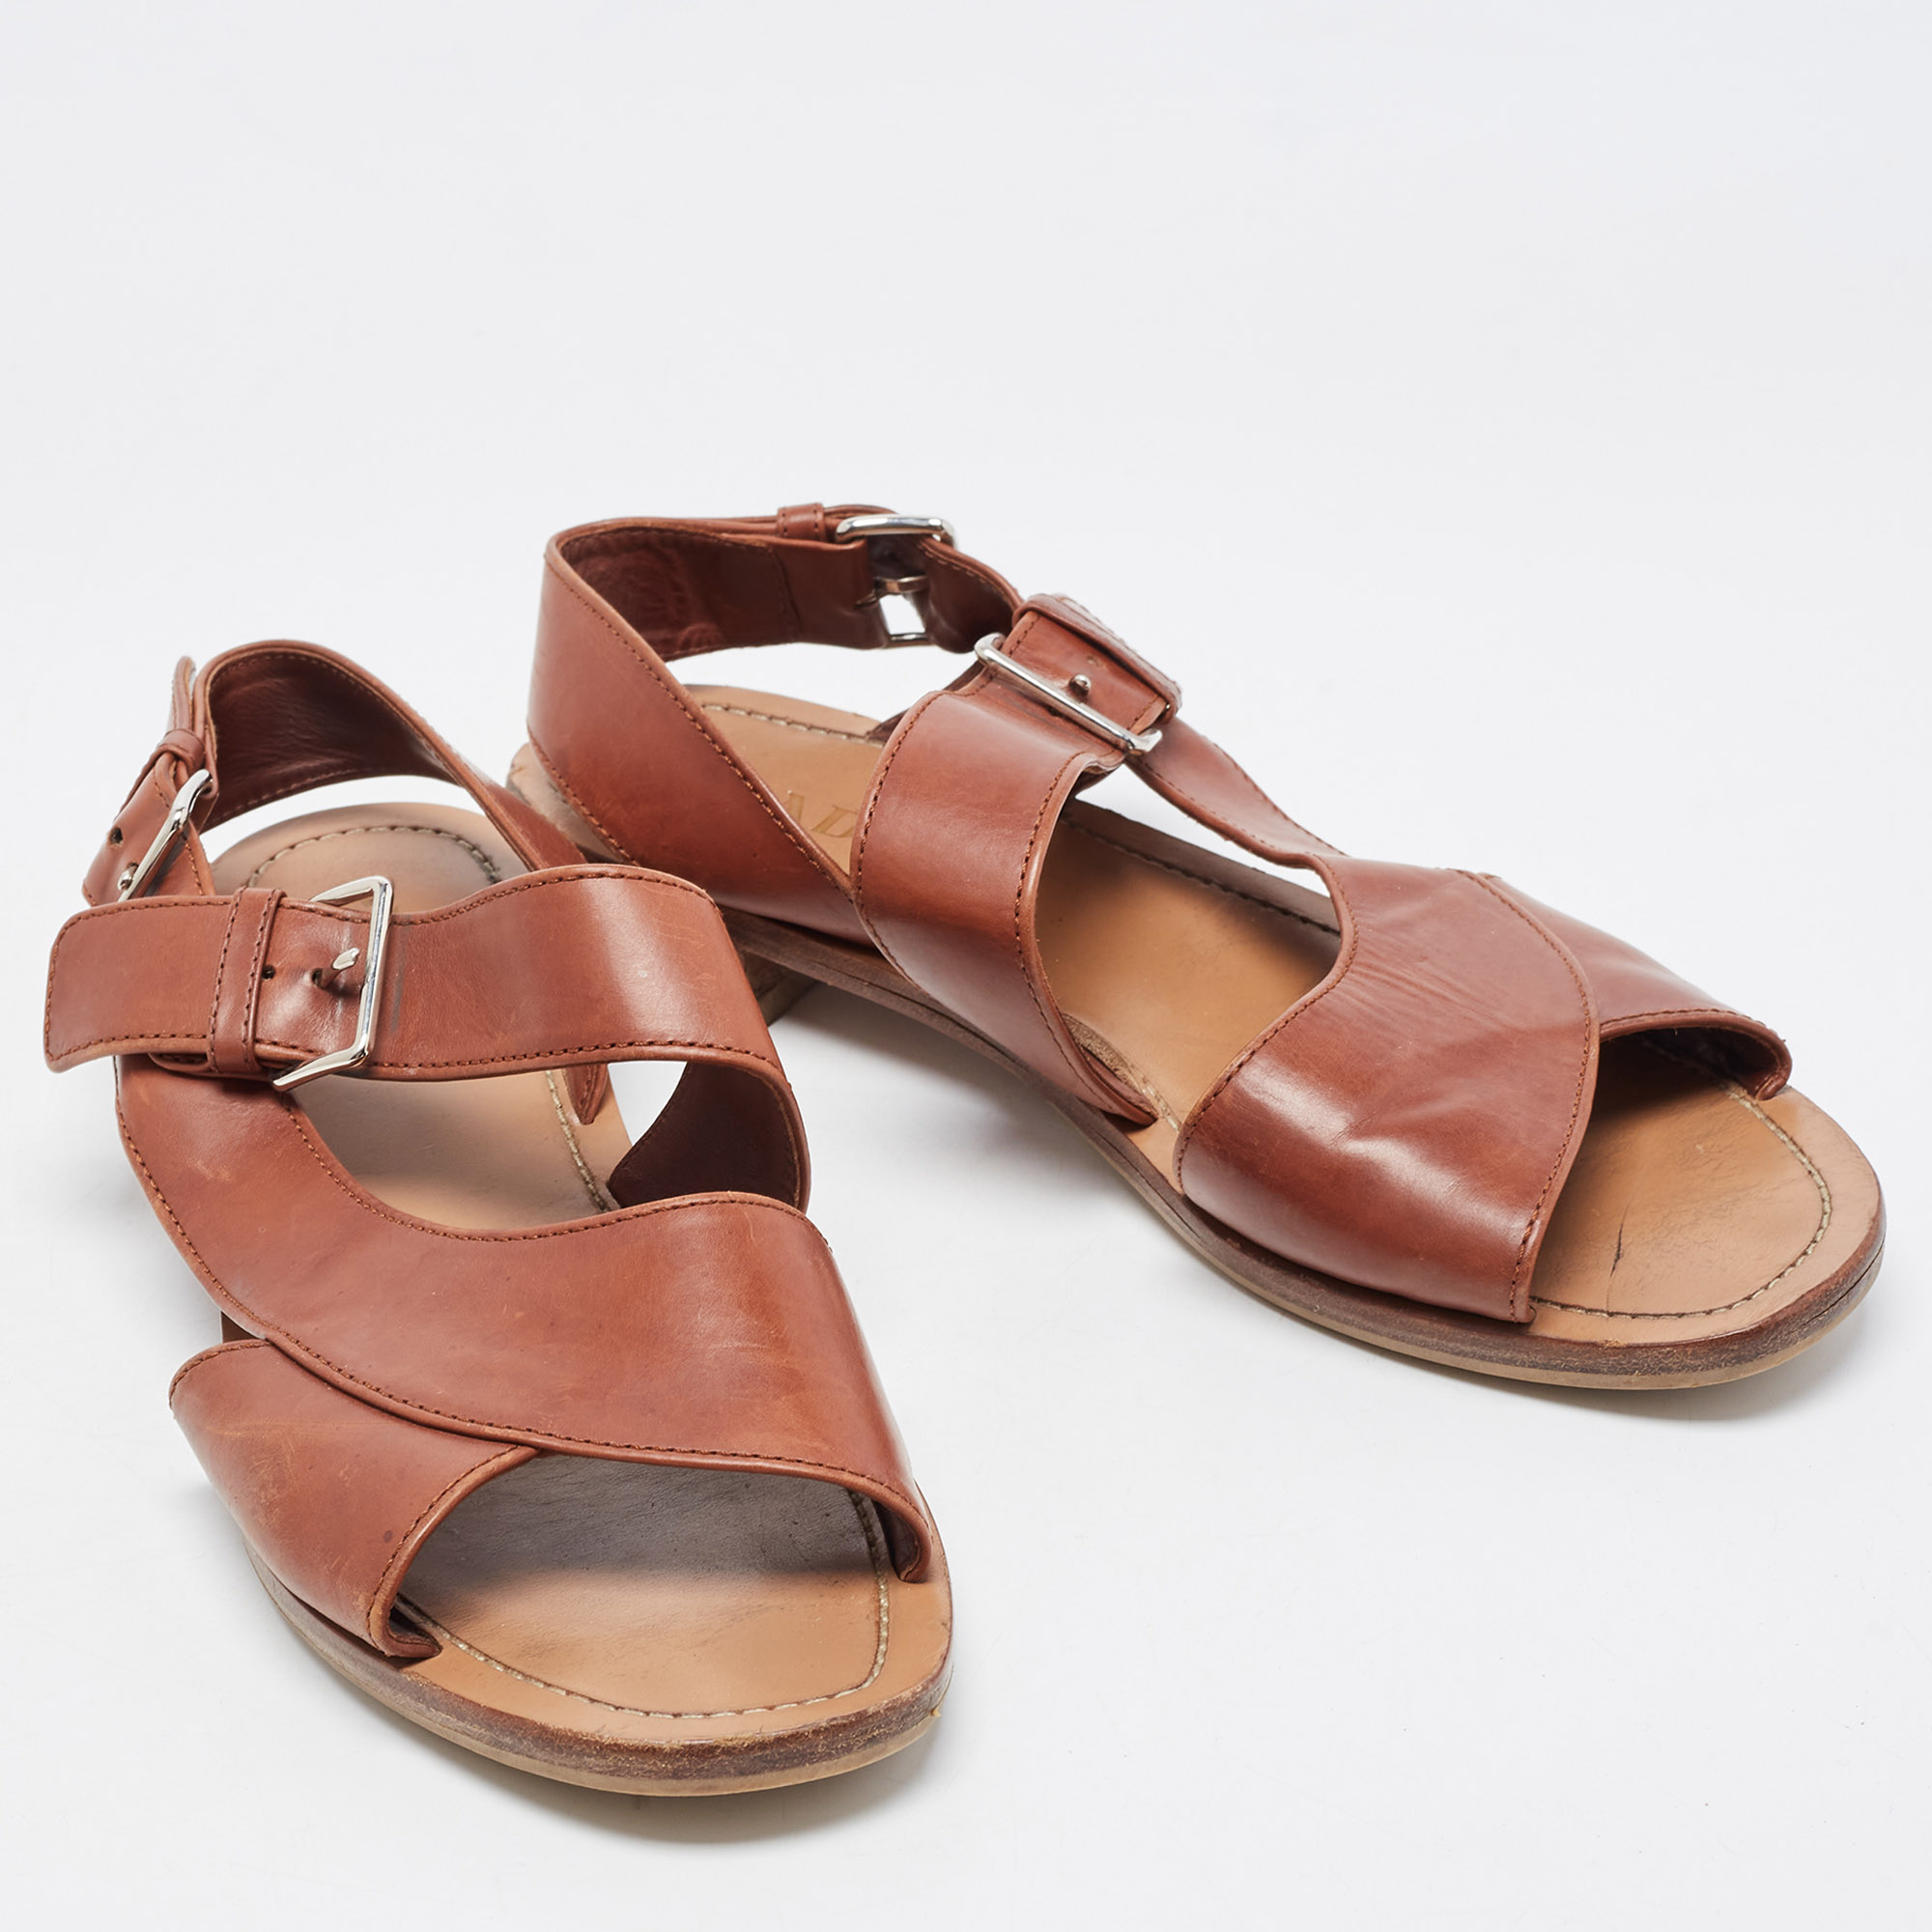 Prada Brown Leather Flat Strappy Sandals Size 38.5